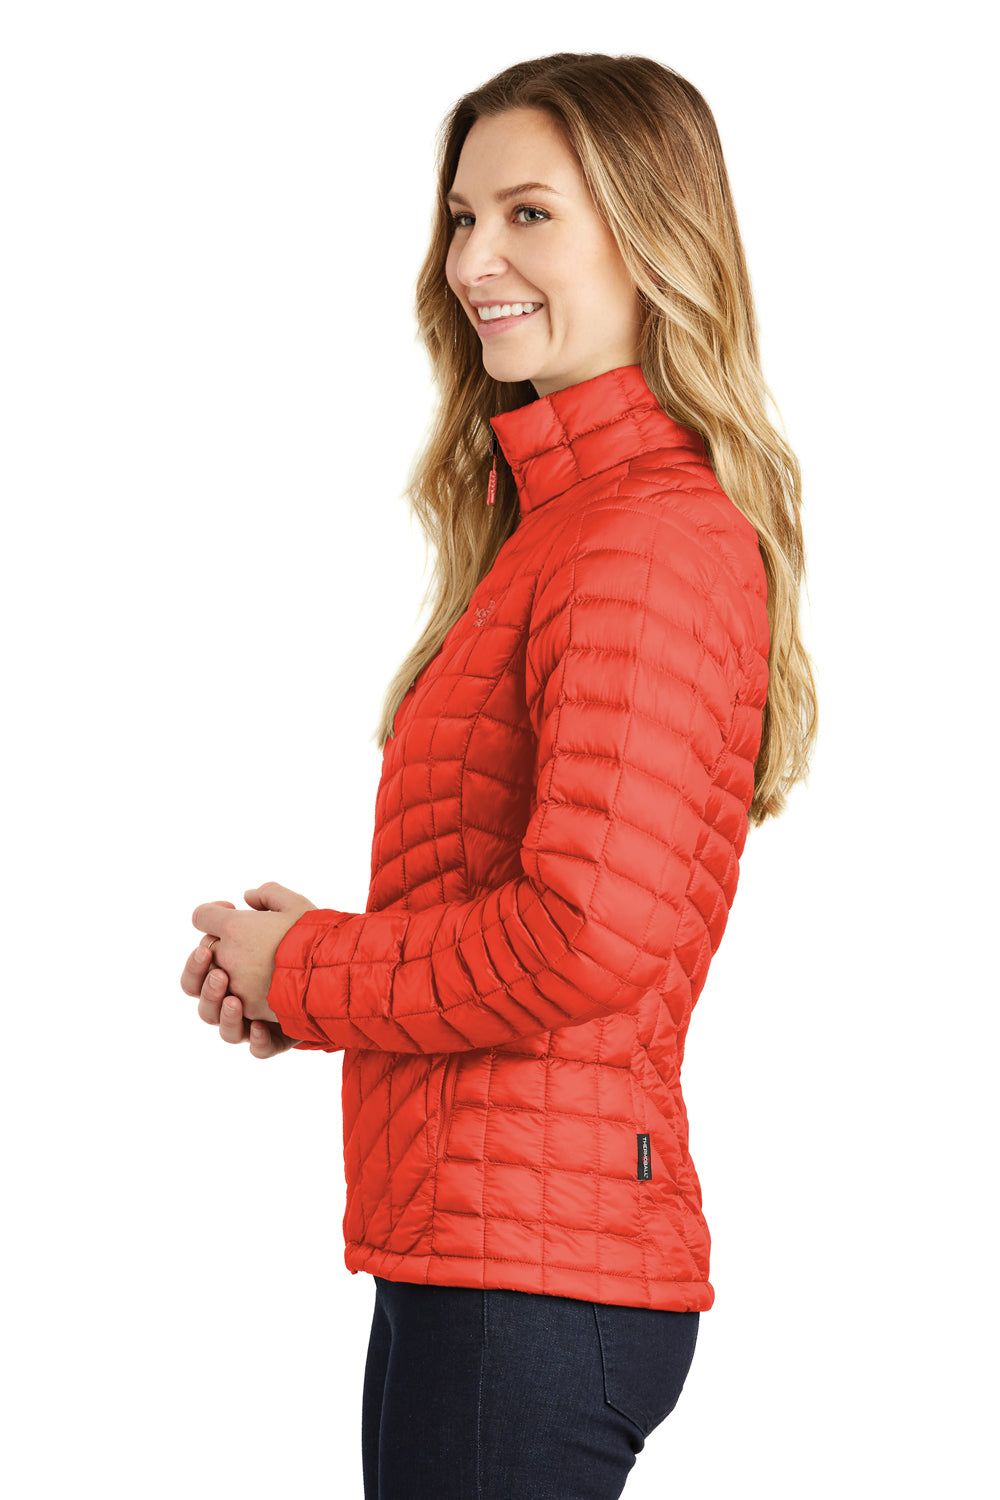 The North Face NF0A3LHK Womens ThermoBall Trekker Water Resistant Full Zip Jacket Brick Red Side